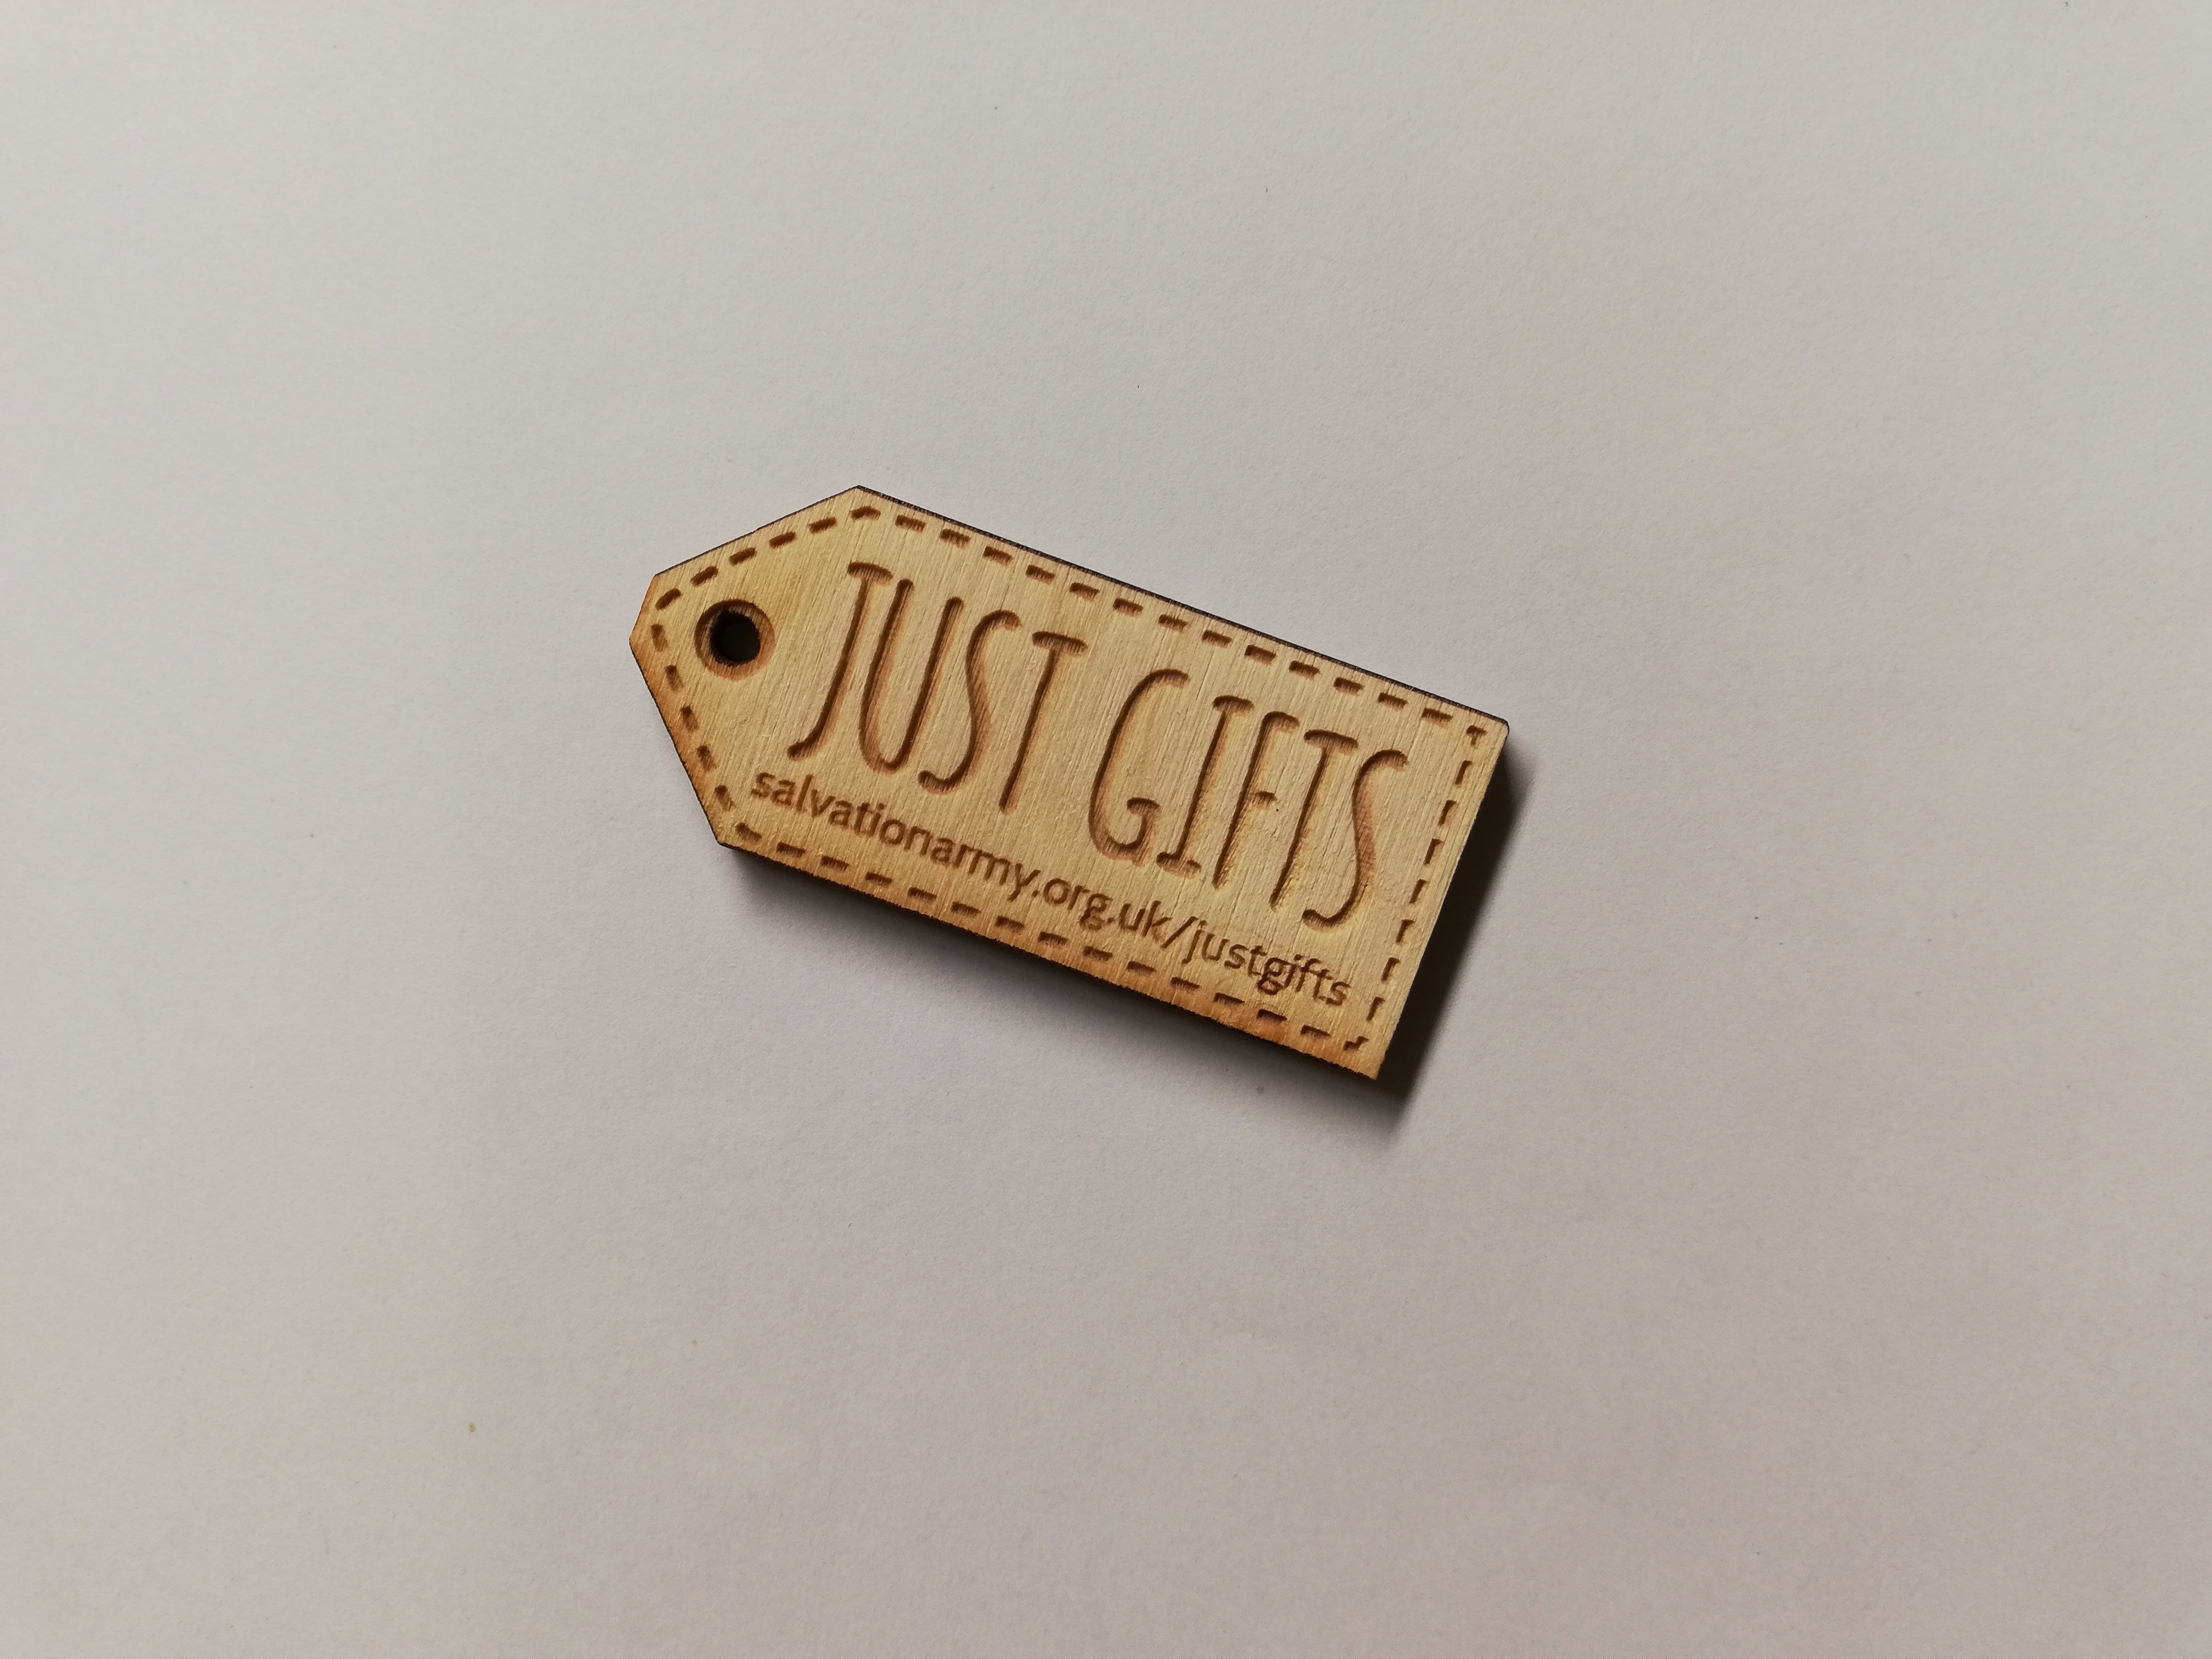 Just Gifts - Magnet